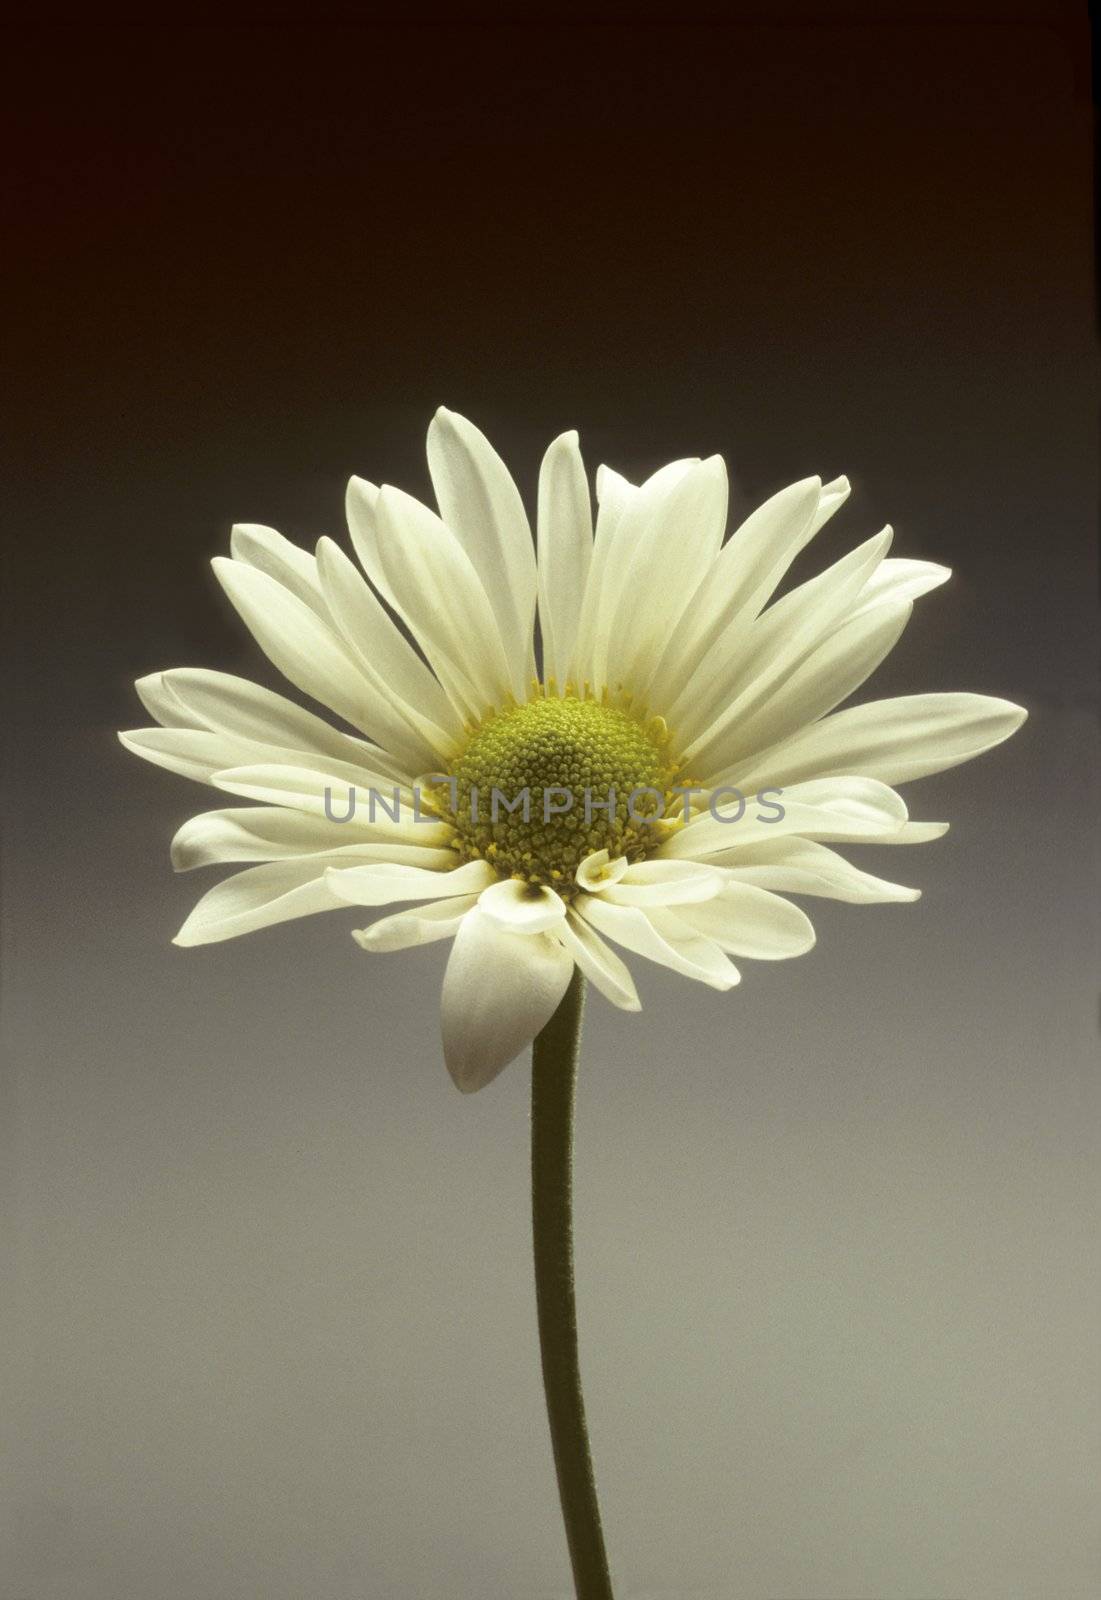 Single white daisy against a gray gradated background